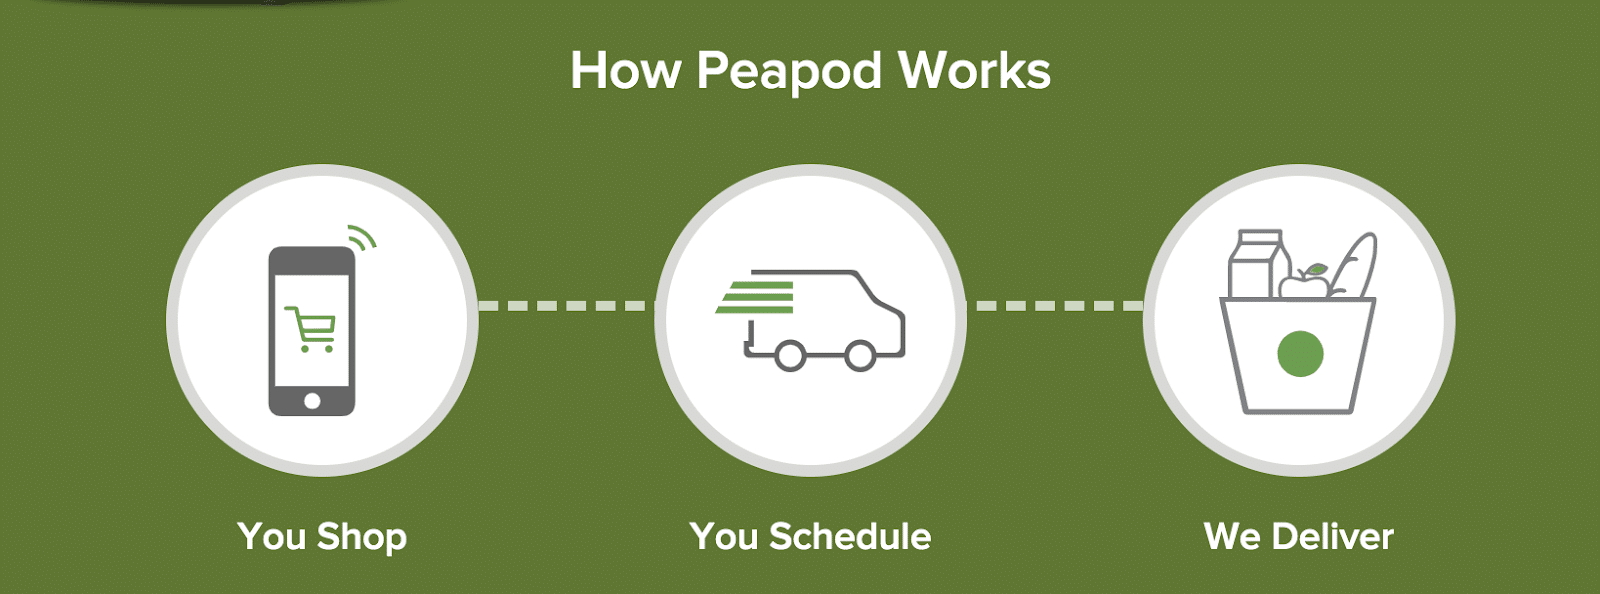 How Peapod works